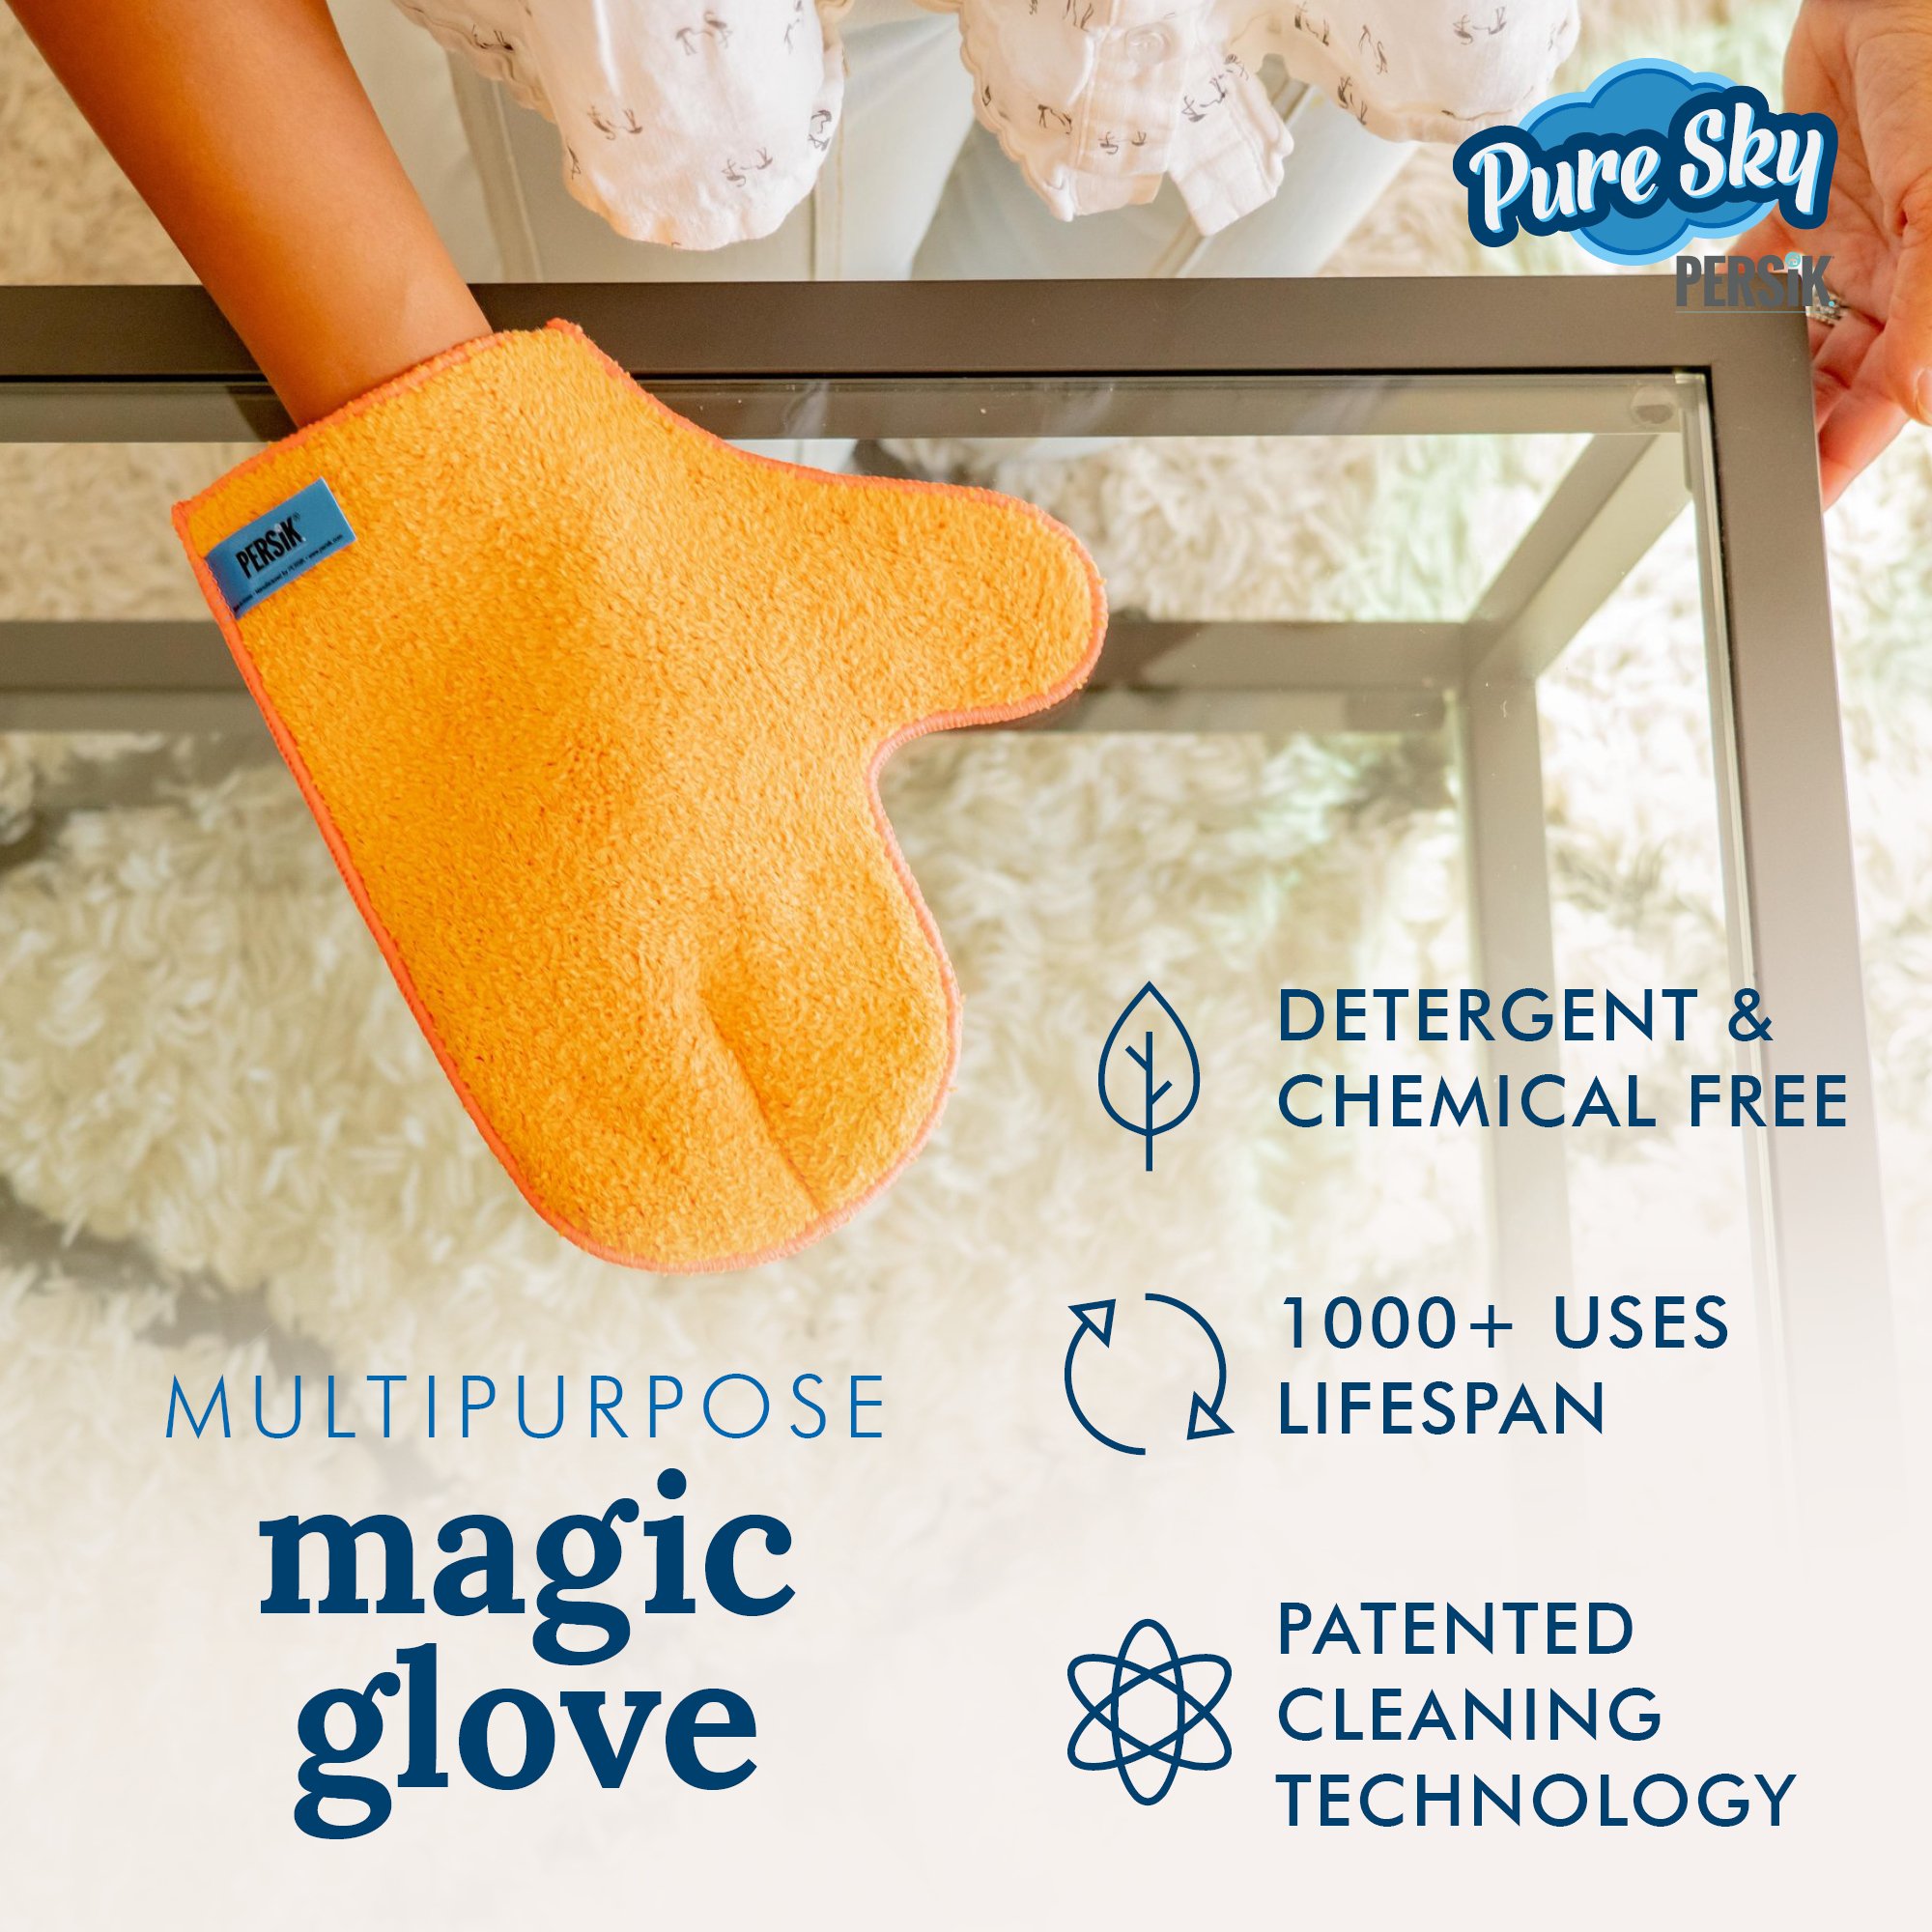 Pure-Sky Magic Microfiber Dusting MITT  Ultra Microfiber Cleaning Cloth Glove  JUST ADD Water No Detergents Needed  Use for Cleaning Furniture, Home Appliances, Screens, Electronics - image 4 of 9